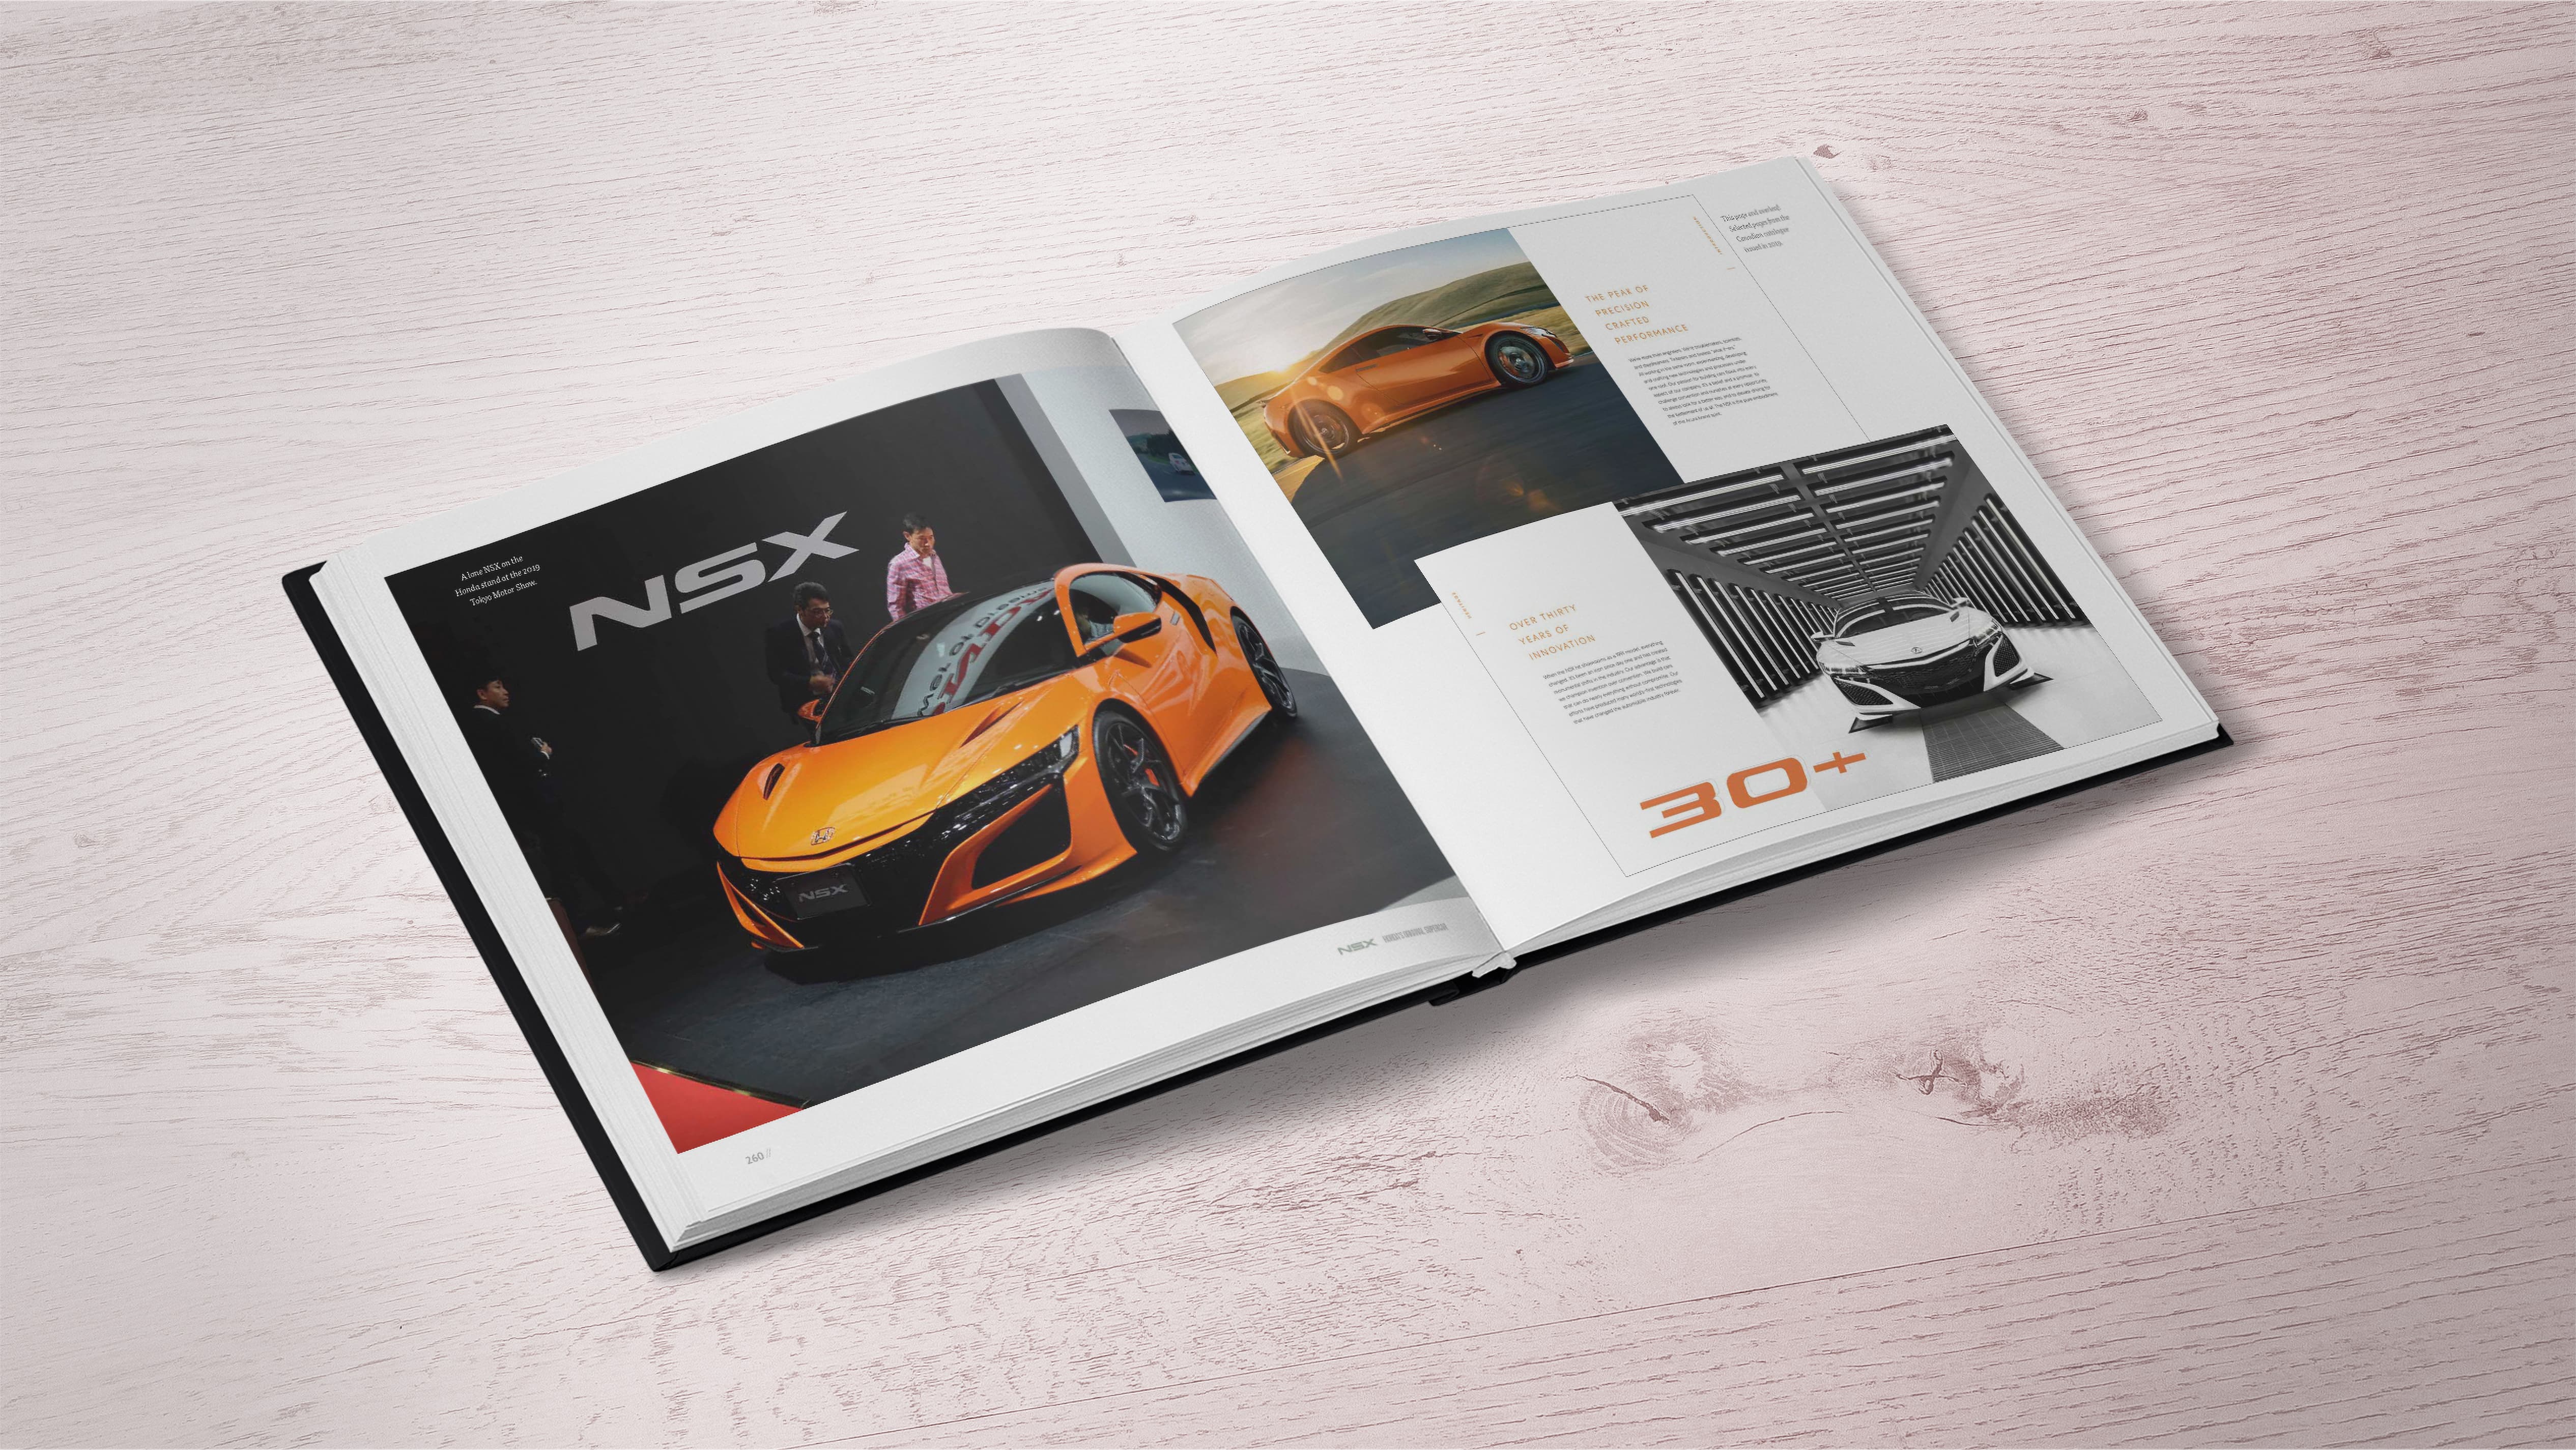 Sample spread of Honda/Acura NSX by Brian Long. Limited Edition of 500 copies ONLY available from Veloce Publishing.s good for SEO